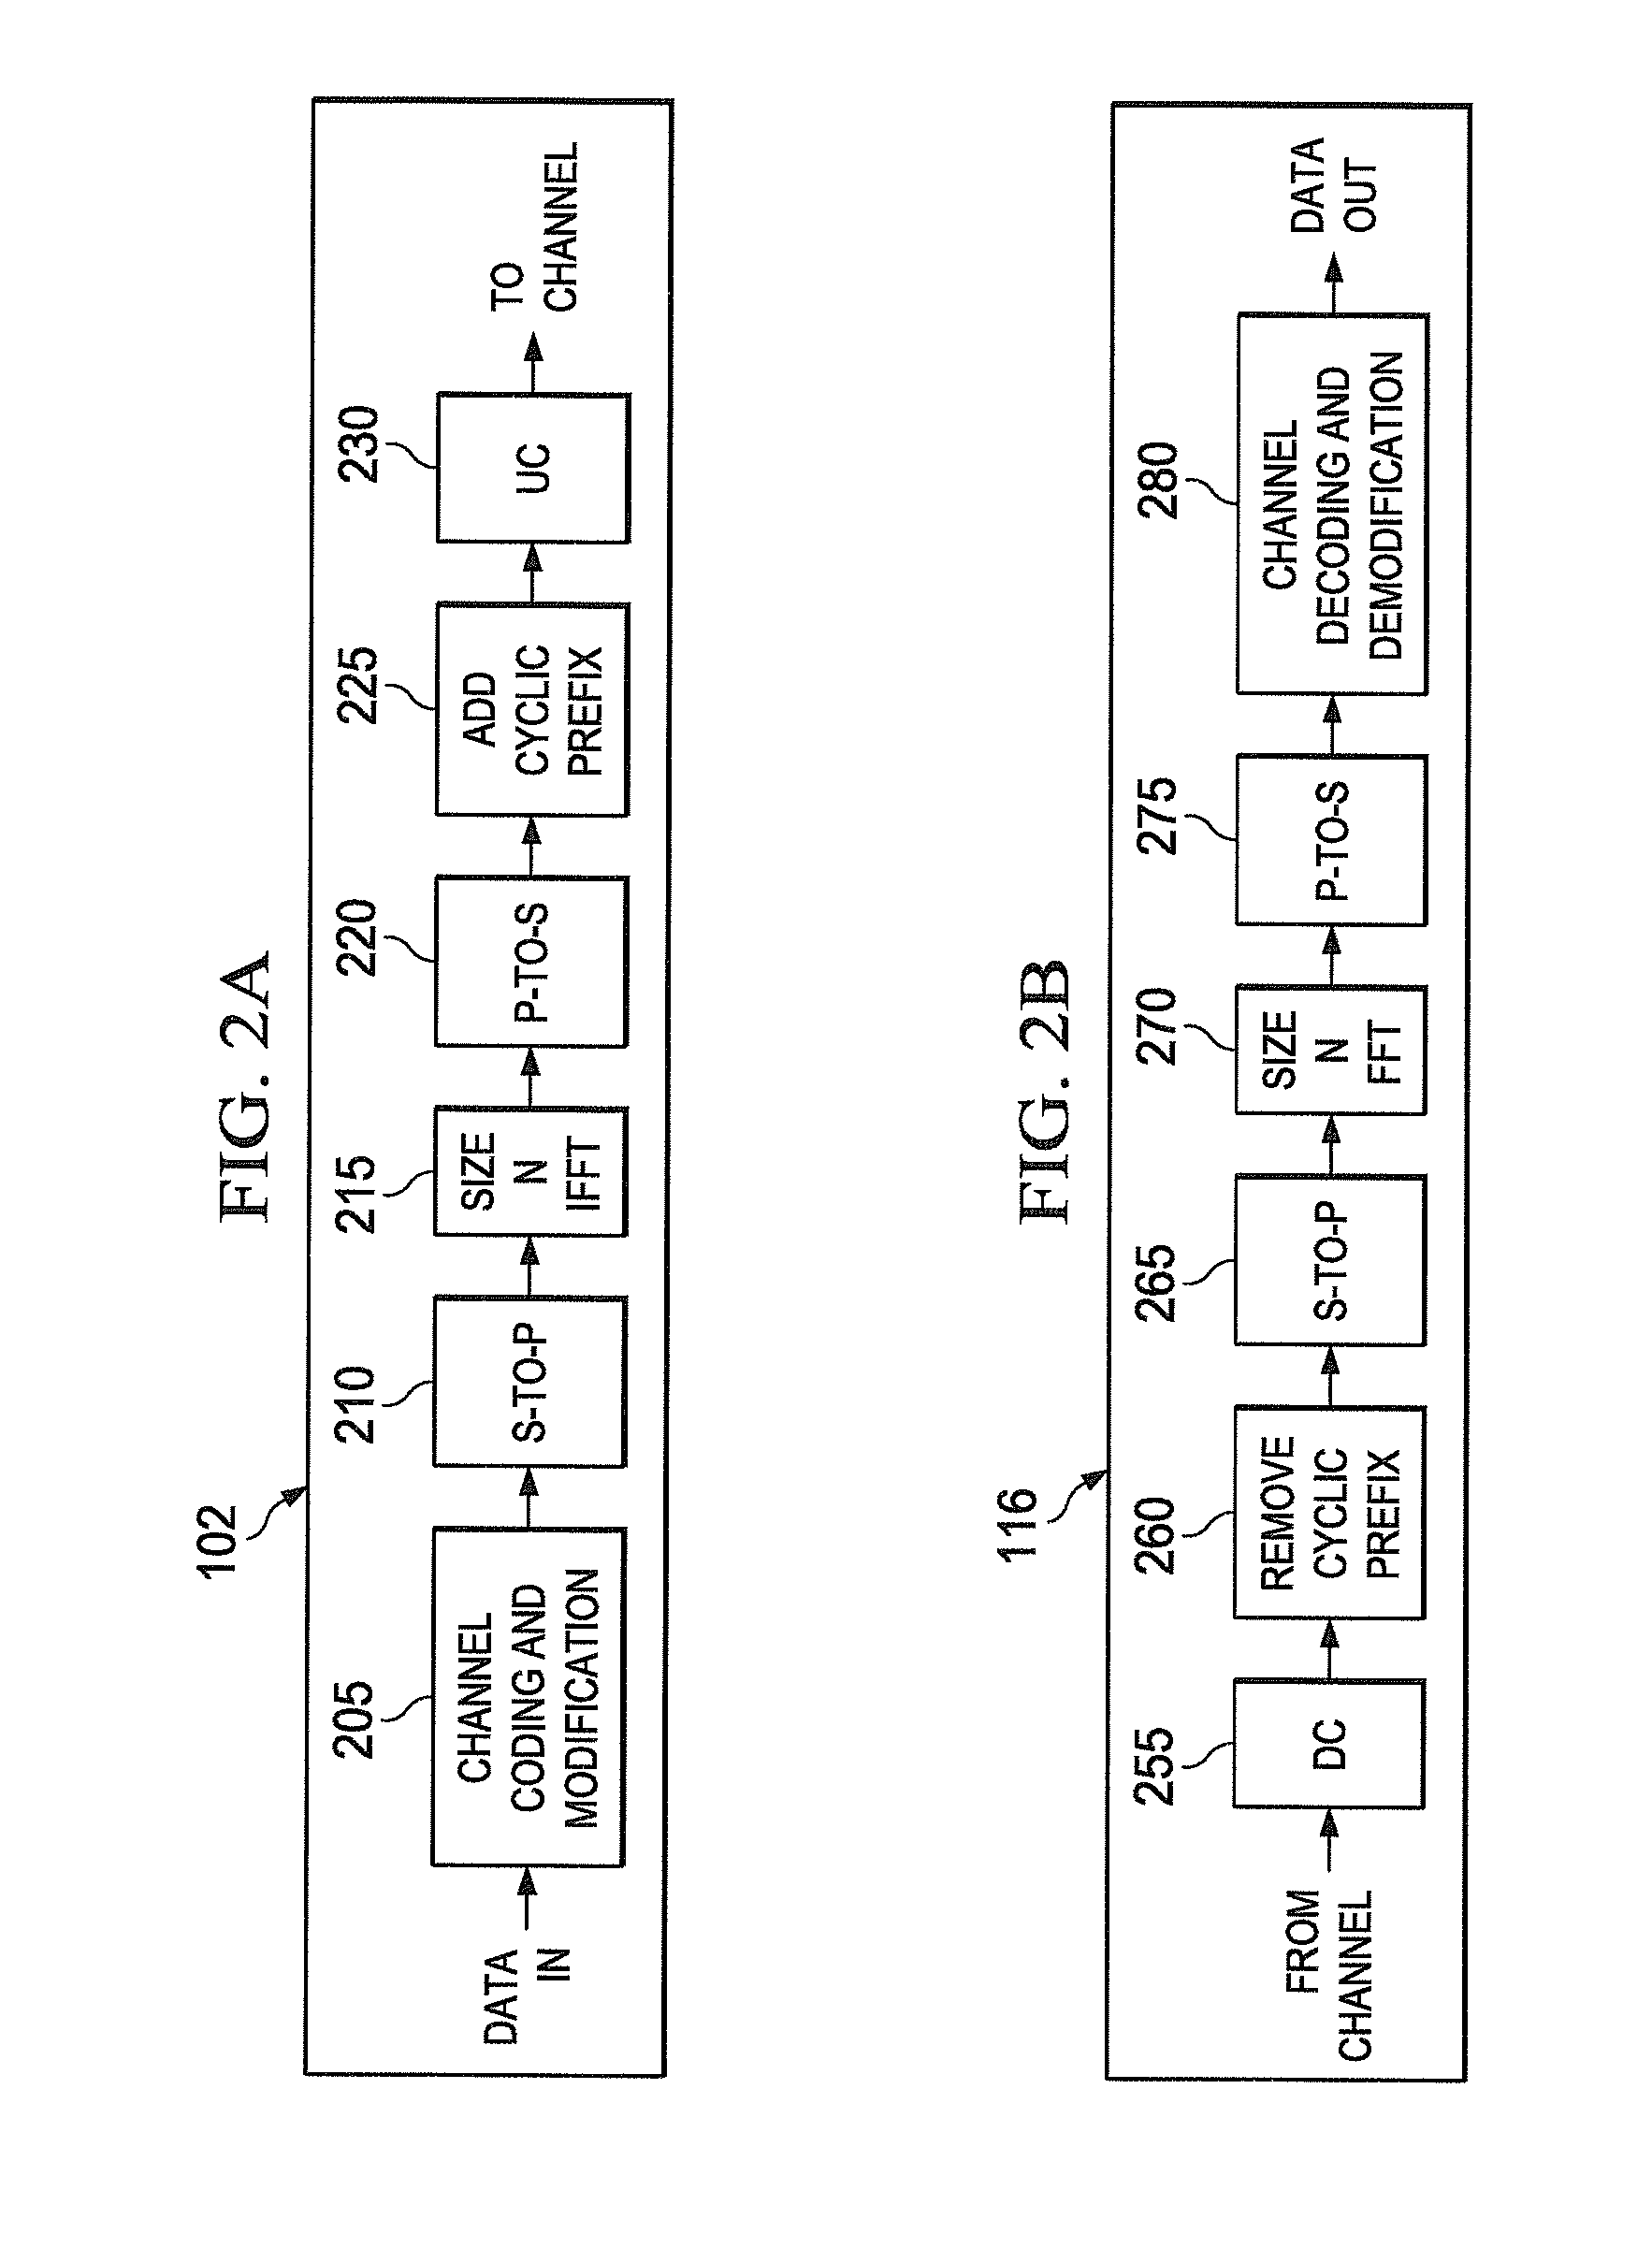 Method and apparatus for parallel processing in a gigabit LDPC decoder